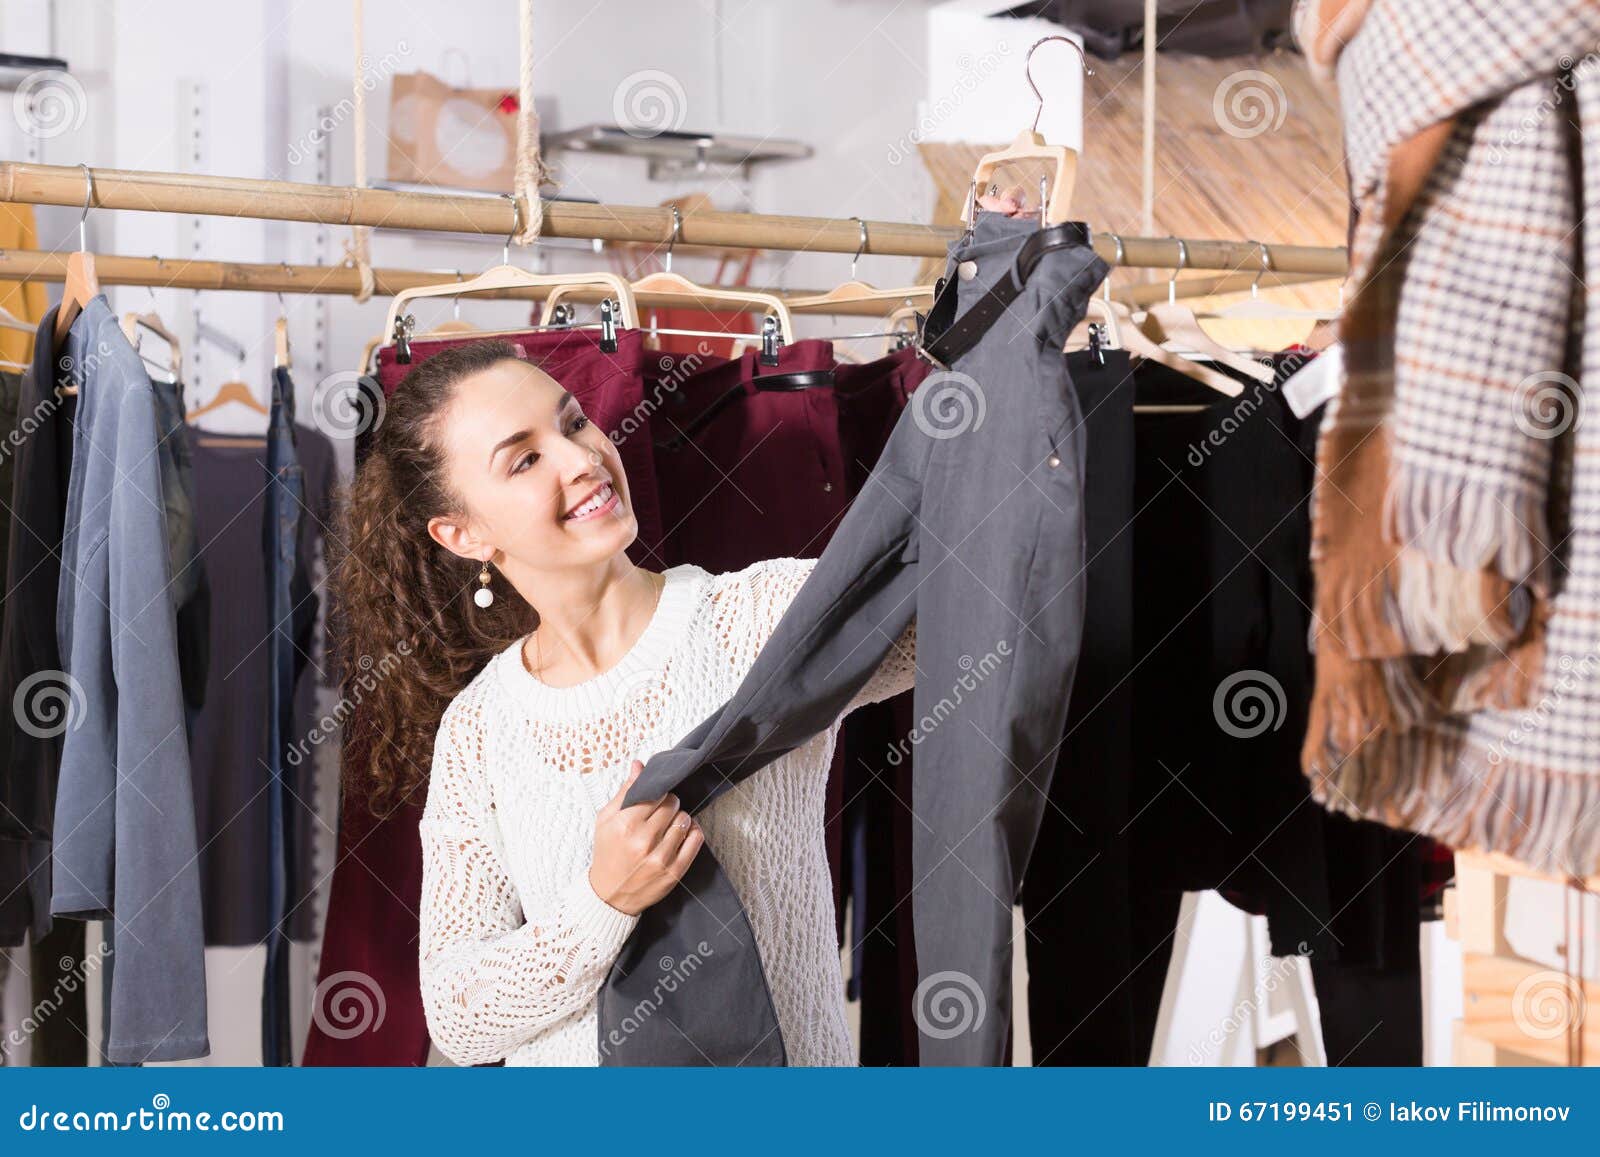 Young Female Brunette Choosing Trousers Stock Image - Image of girl ...